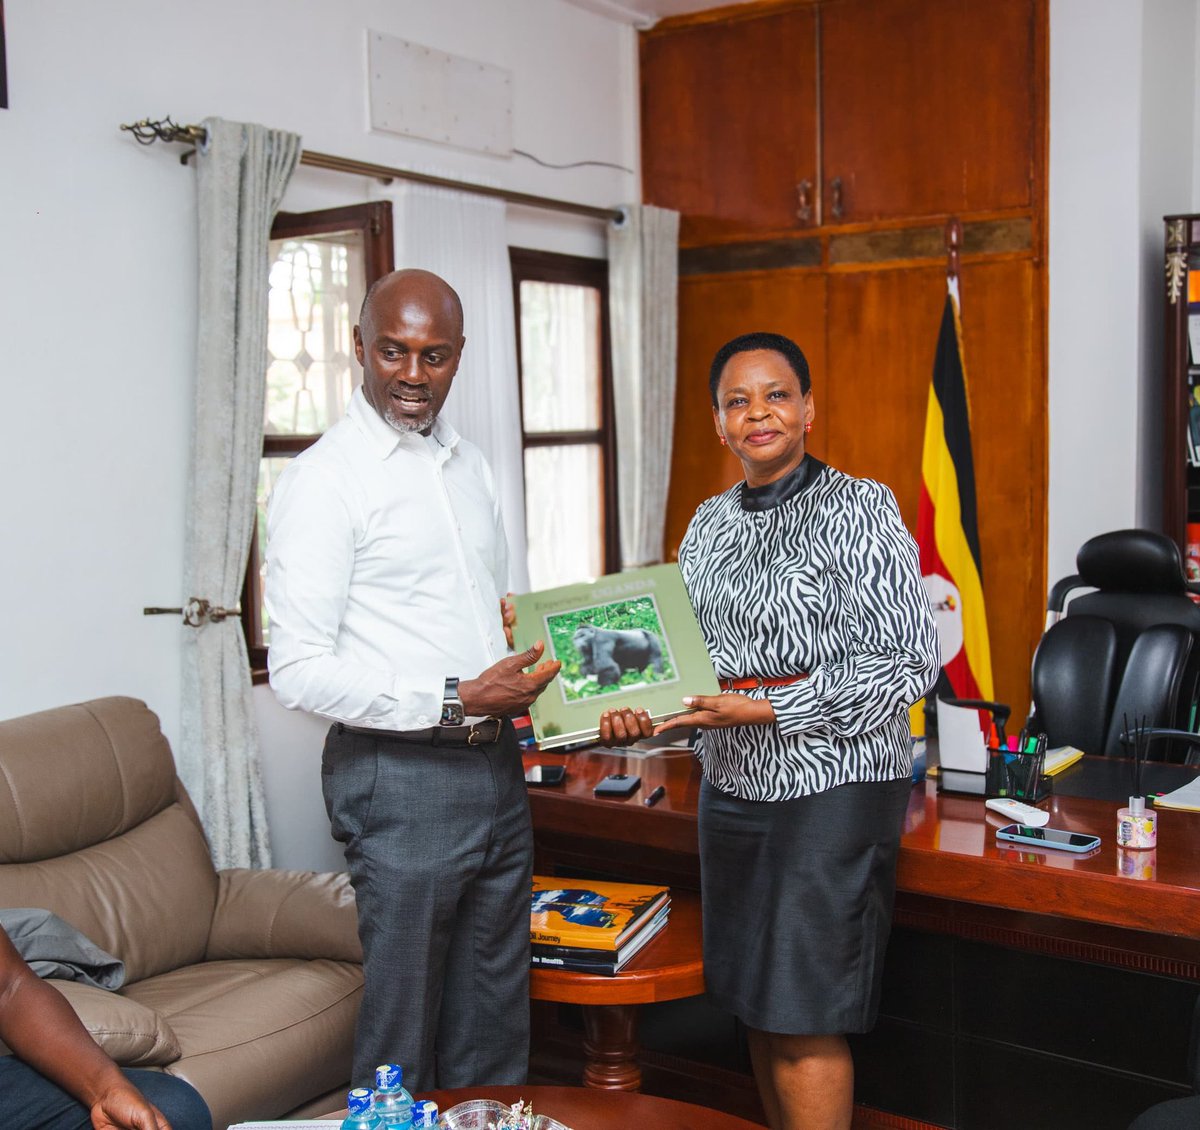 Yesterday, @ShieldInvestors head, Afande @edthnaka had a fruitful discussion with Senior Journalist @AndrewMwenda, about usage of Electronic Investors Protection Portal protection.statehouseinvest.go.ug on how to protect investors. Investors are encouraged to use it. #EmpoweringInvestors